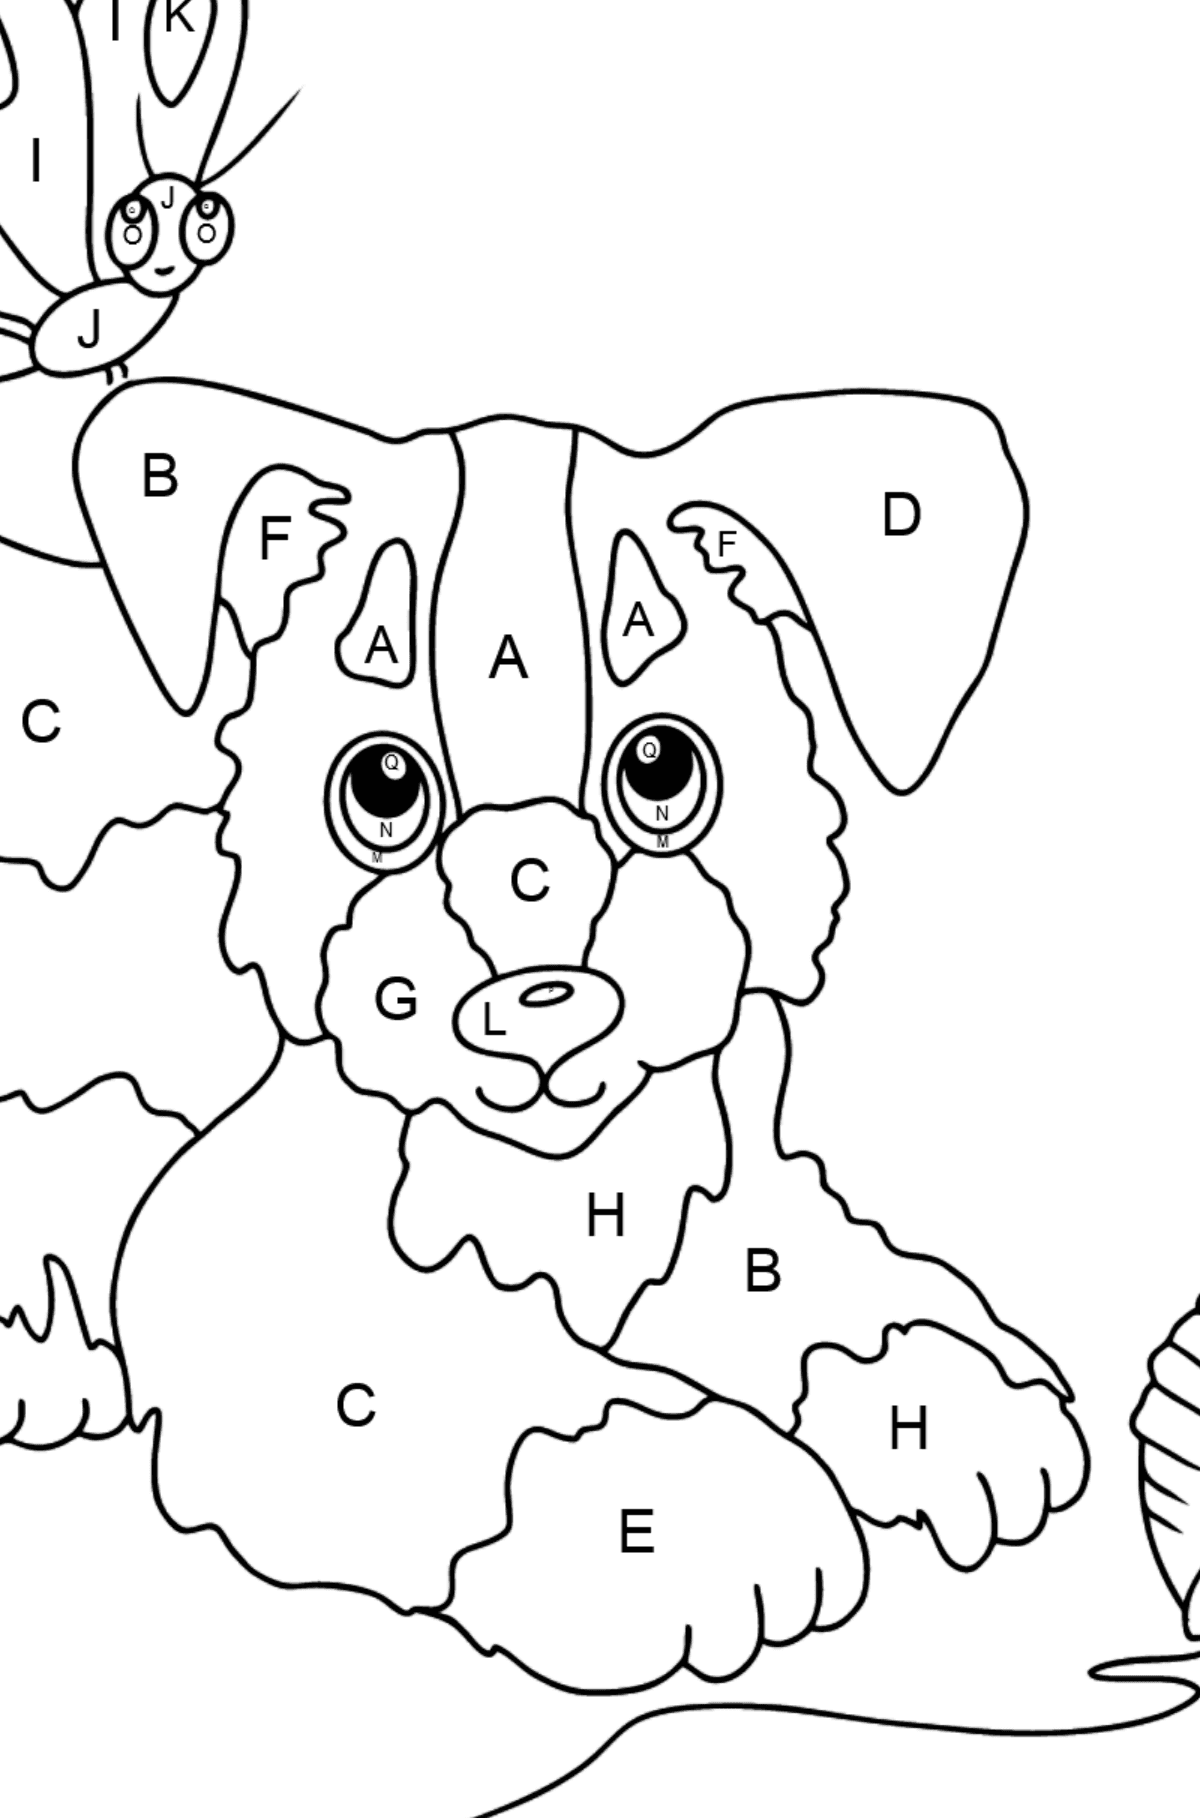 Coloring Page - A Dog is Playing with a Ball of Yarn and Butterflies - Coloring by Letters for Kids